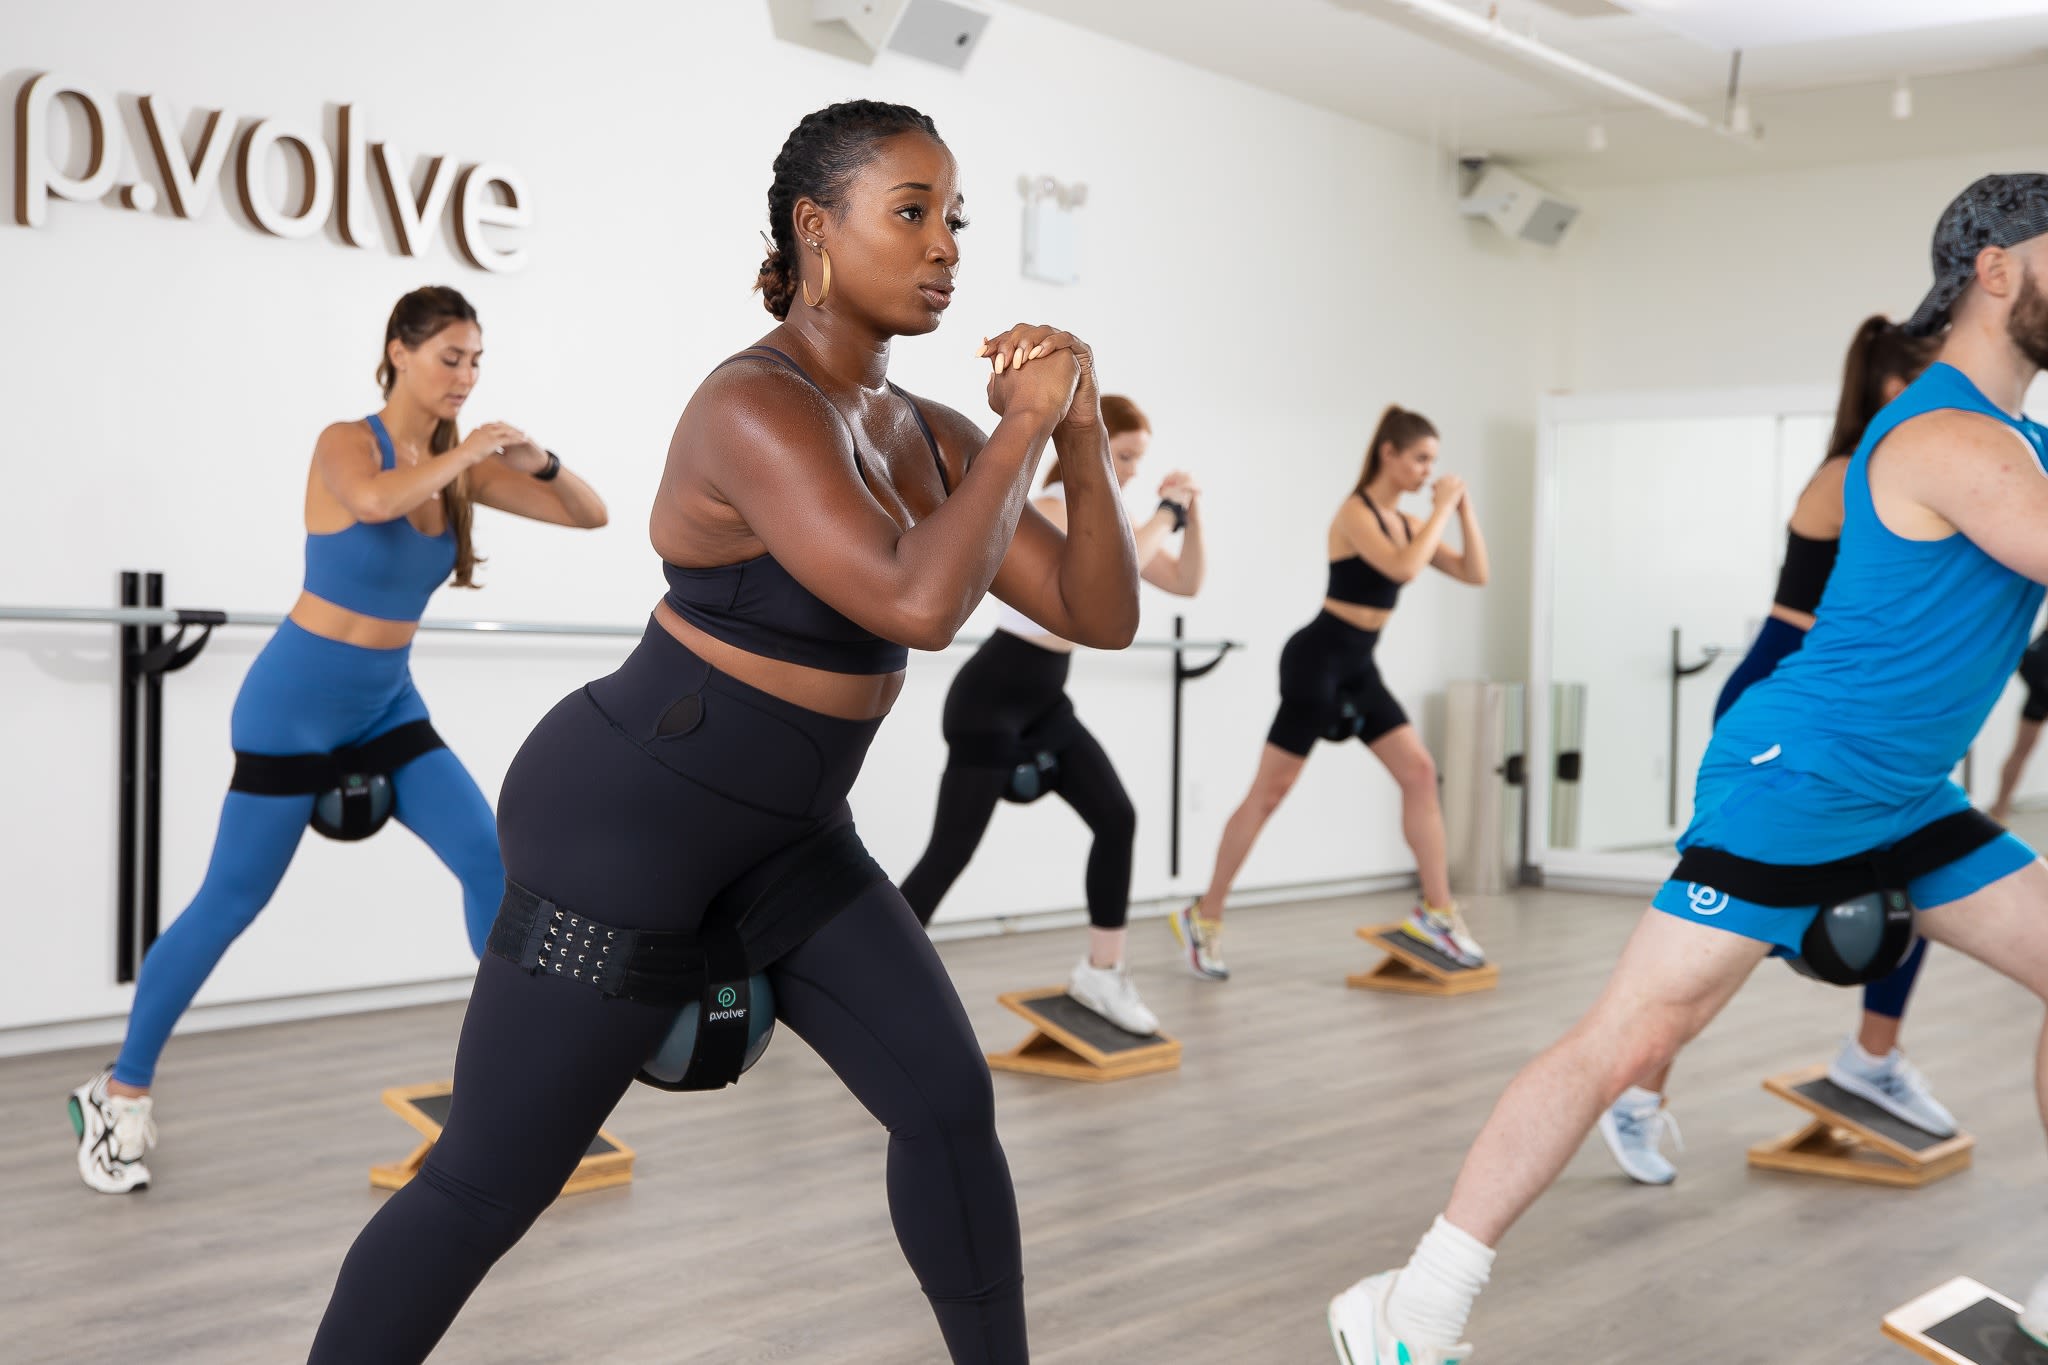 Hot Yoga Chelsea NYC: Read Reviews and Book Classes on ClassPass